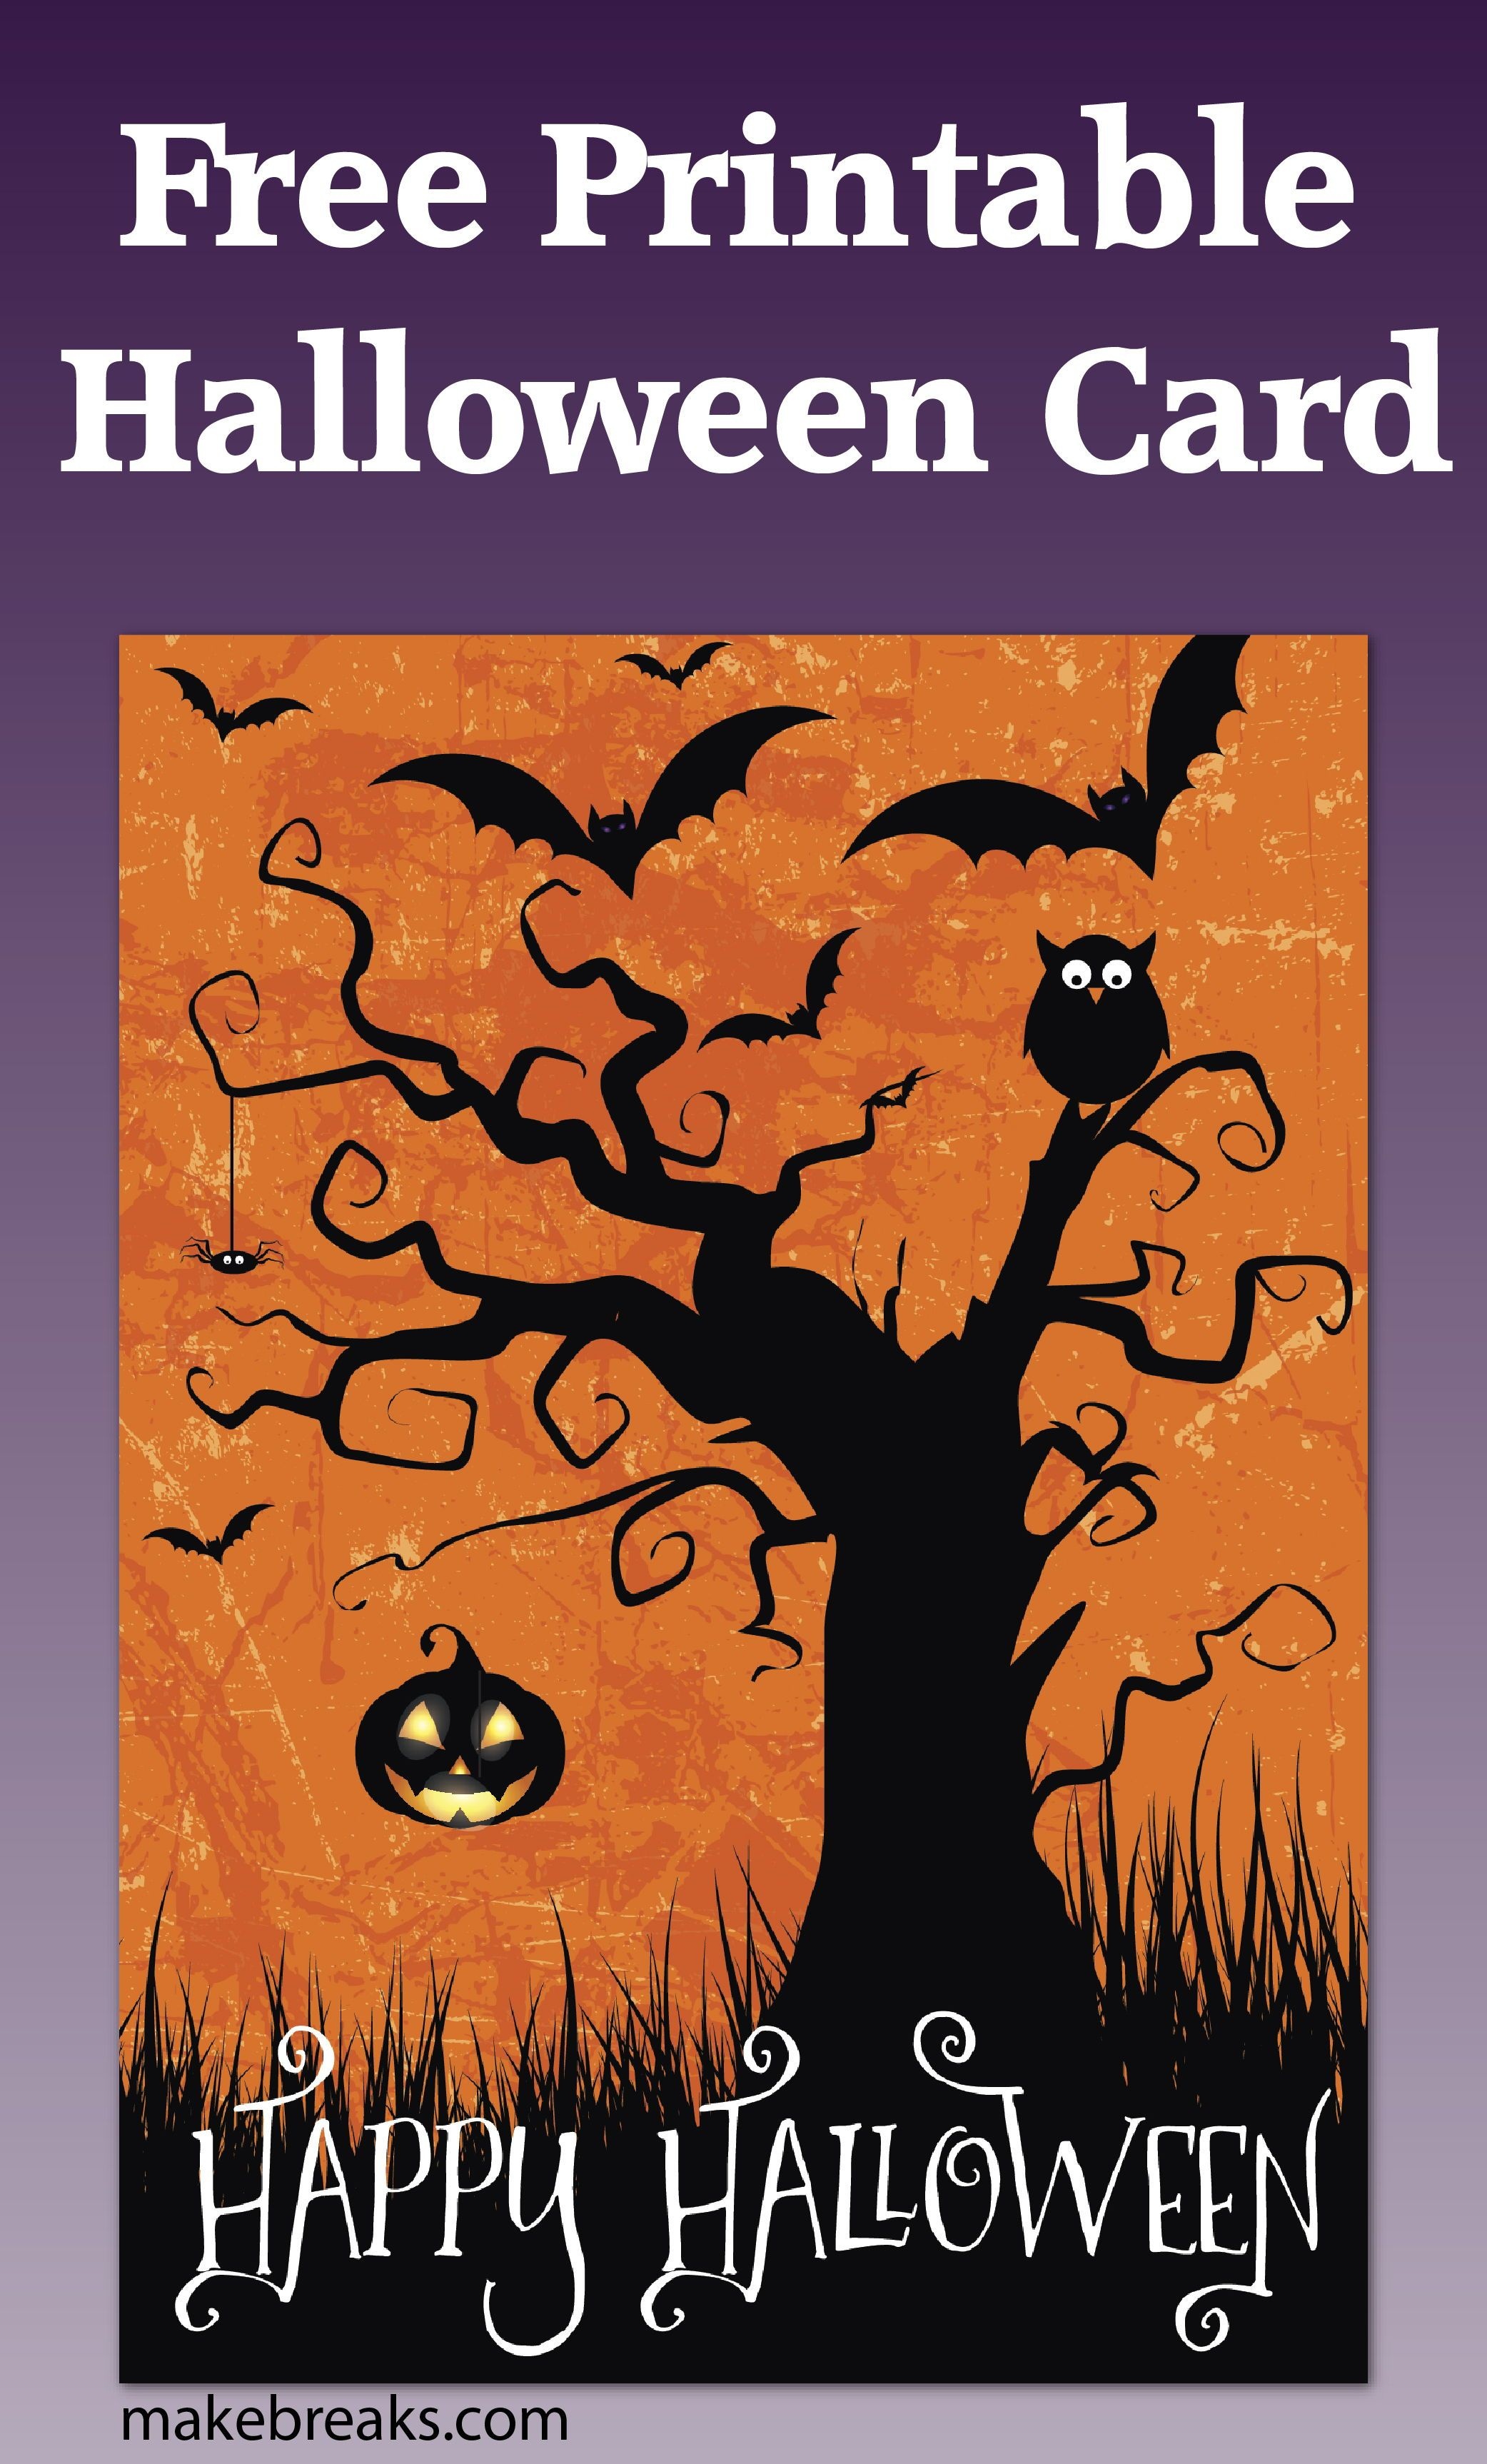 Free Printable Happy Halloween Card Or Party Invitation | Free Party - Printable Halloween Cards To Color For Free